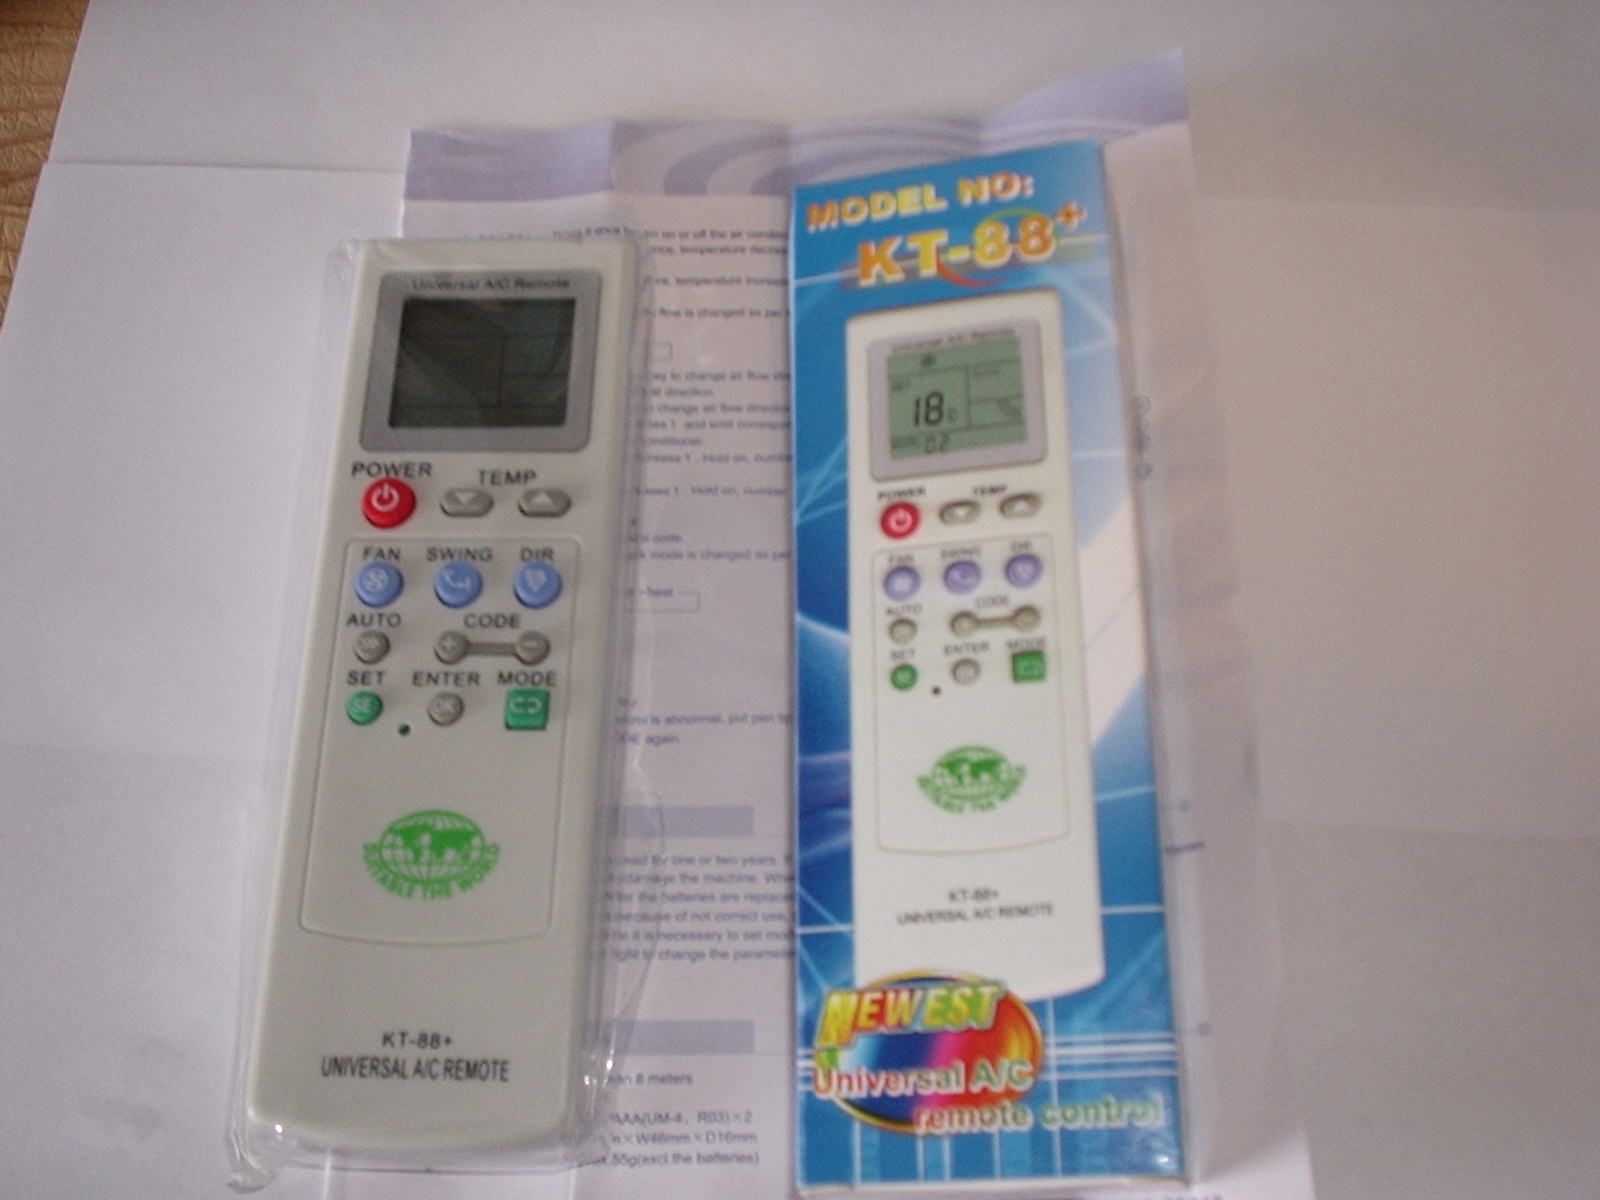 UNIVERSAL PROGRAMABLE REMOTE CONTROL FOR AIR CON UNITS AC53002